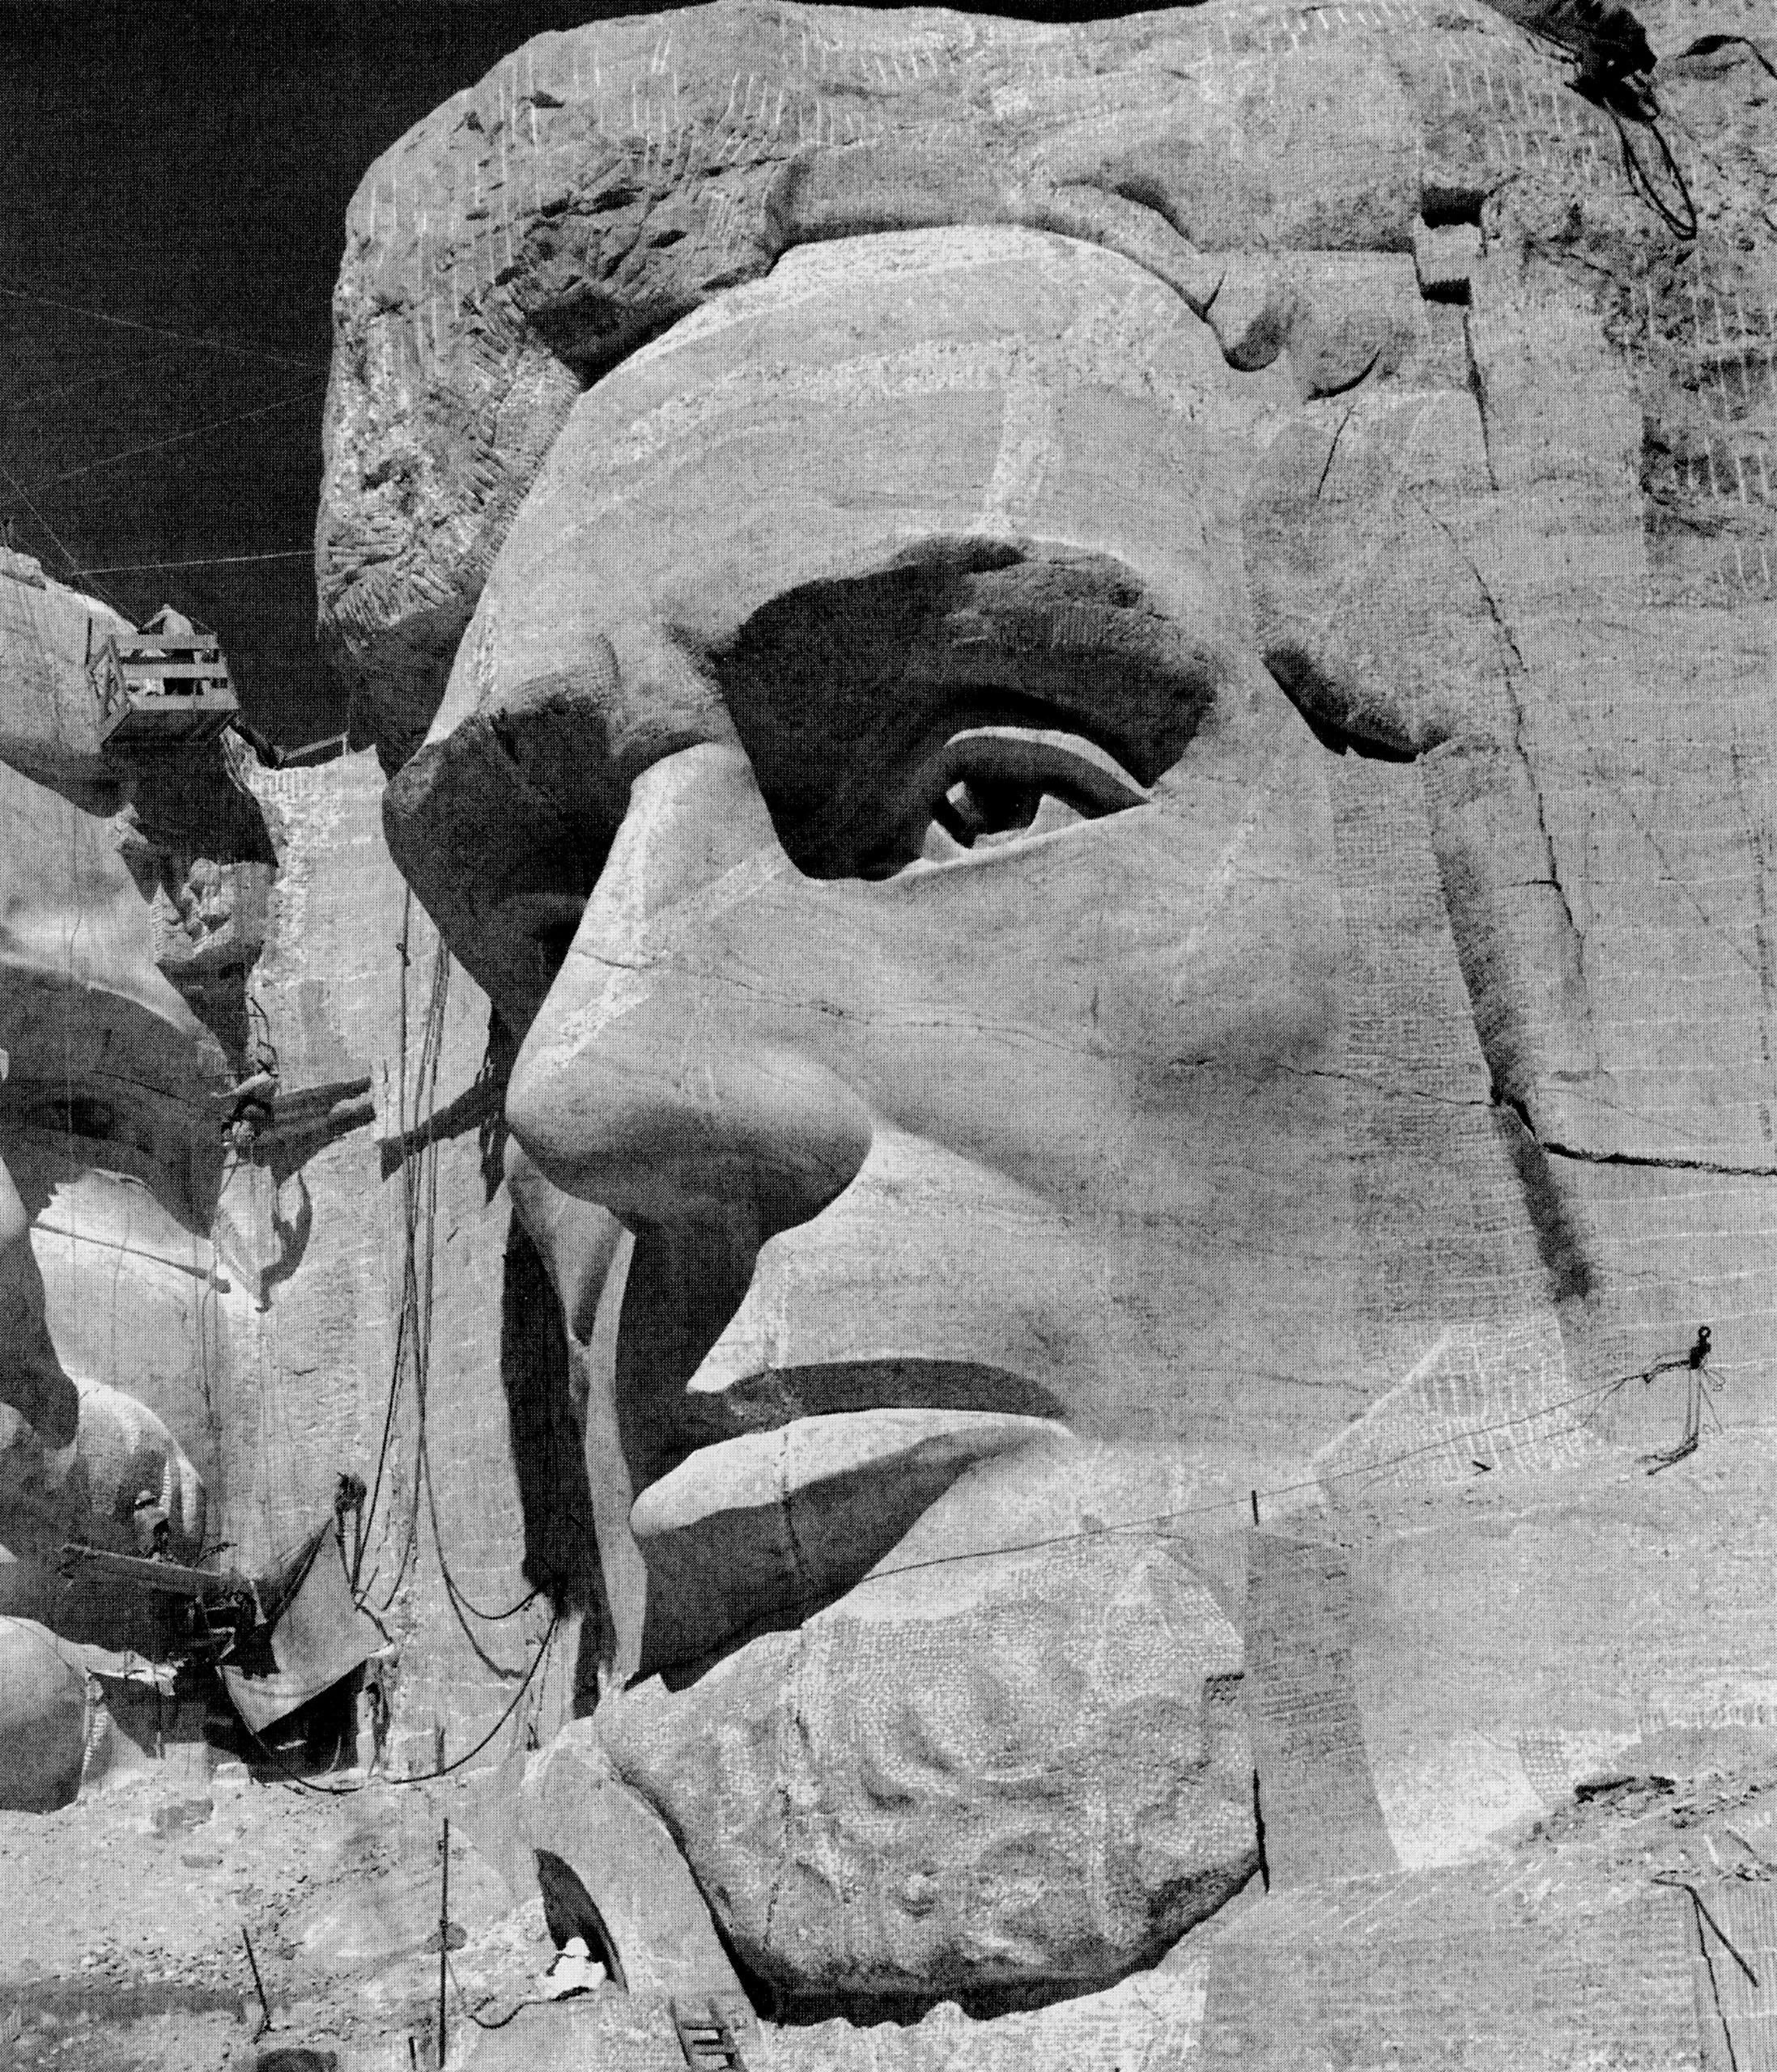 The head of Abraham LIncoln under construction, c. 1930s. Lincoln was dedicated on Sept. 17, 1937.